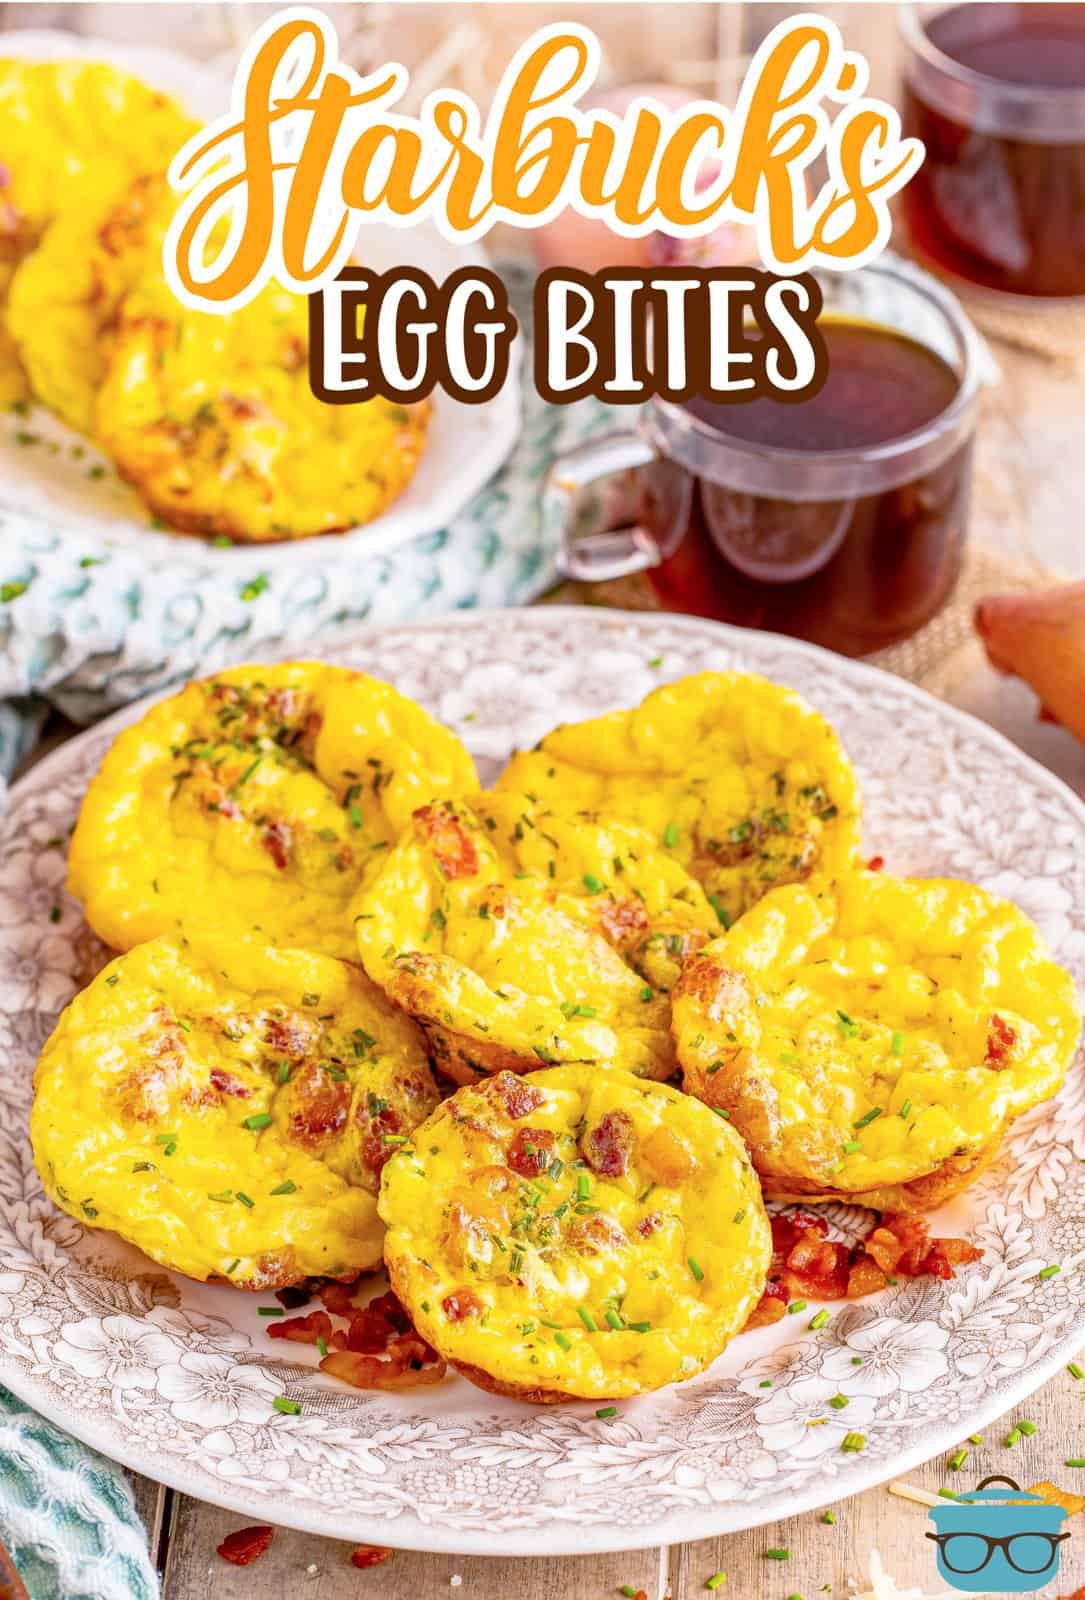 a stack of egg bites on a brown and white floral plate with a clear cup of coffee in the background.